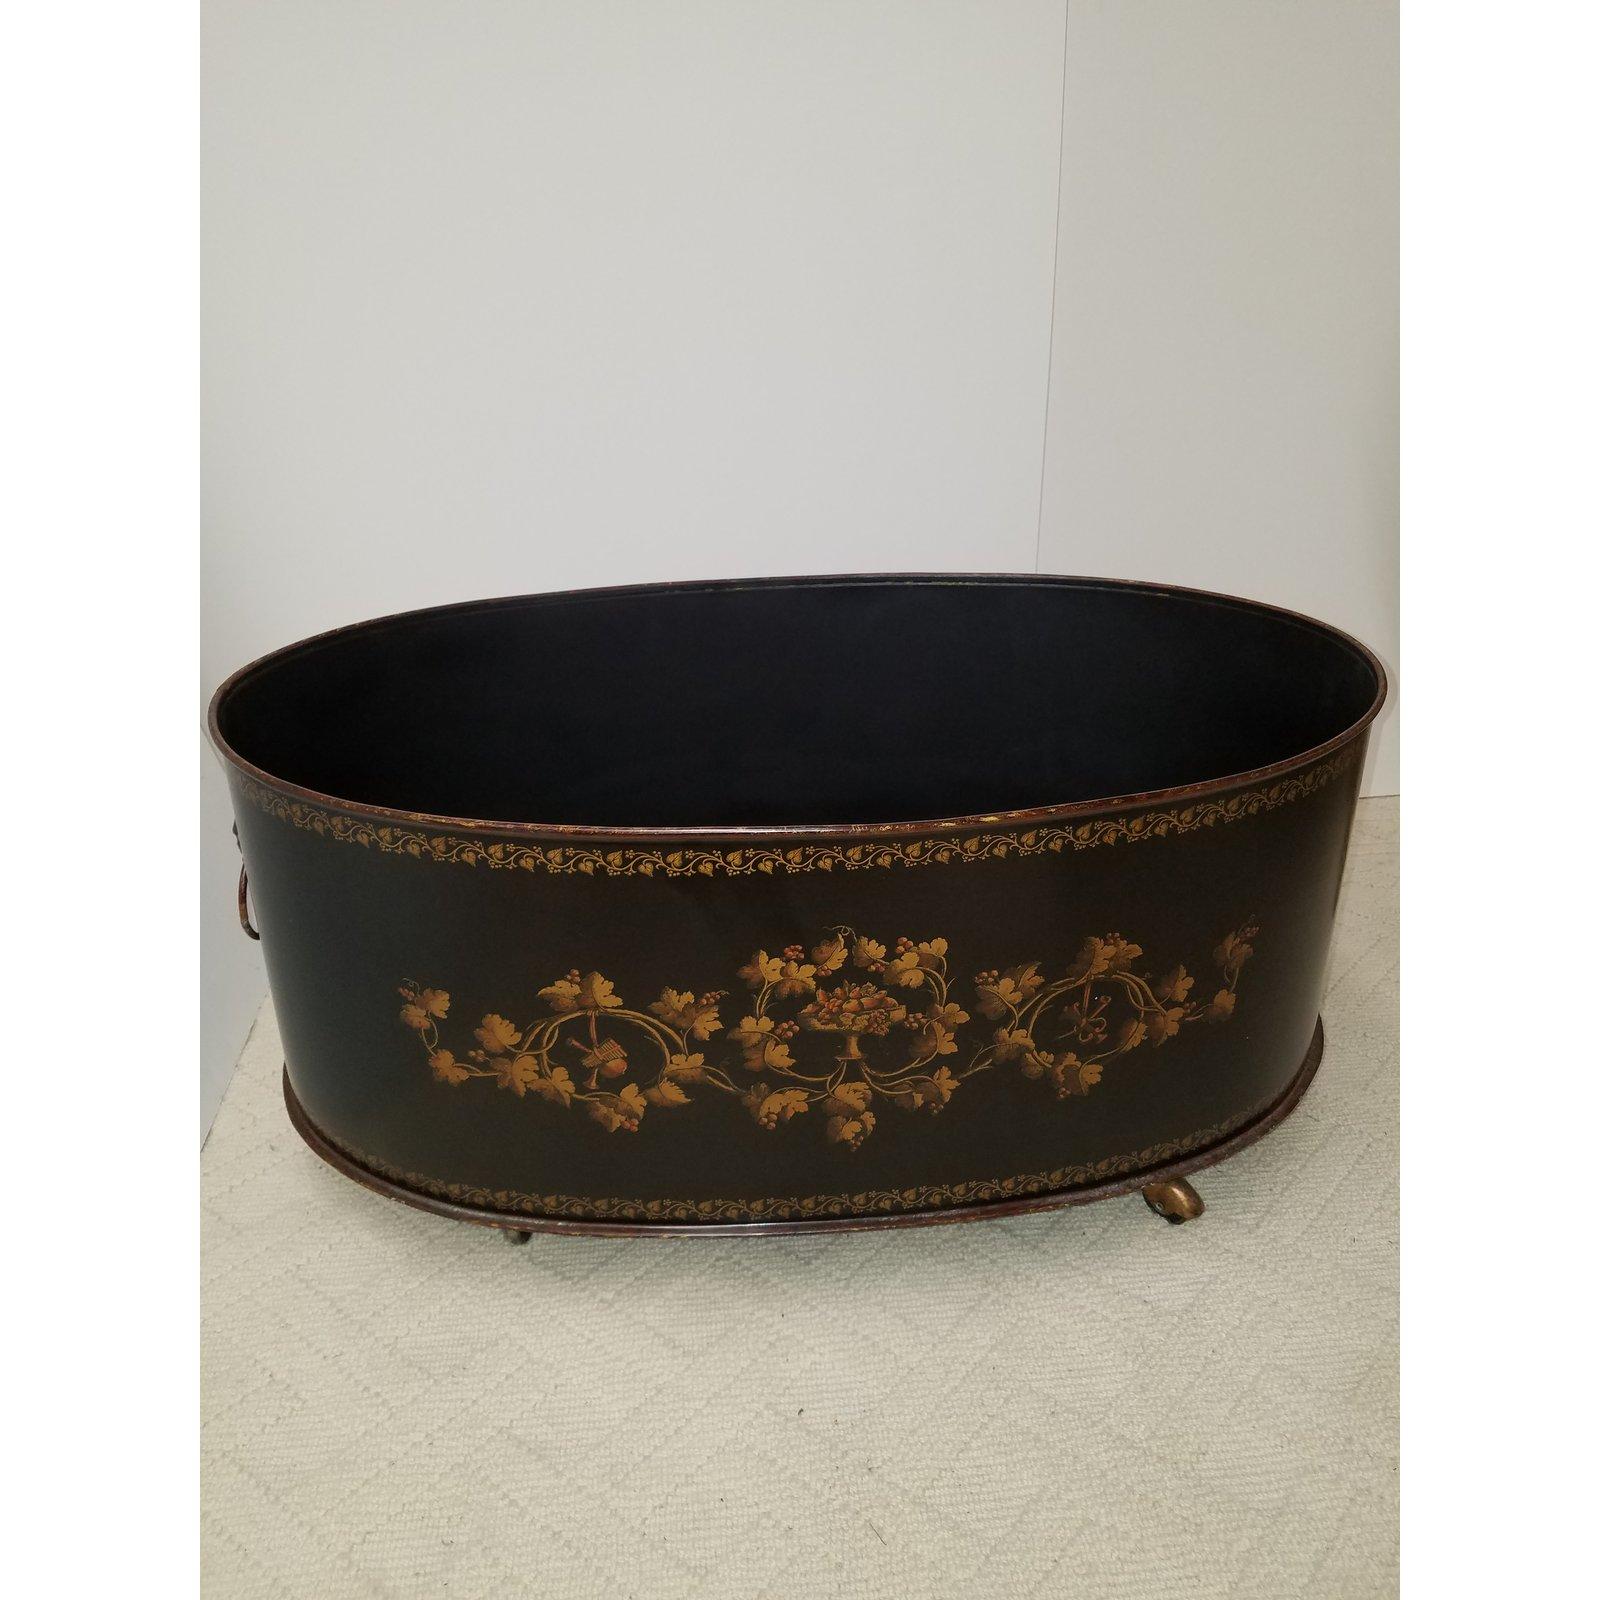 Very large hand painted oval Regency style black and gold planter in the manner of Maitland Smith. The planter which would work well as a log holder with Classic English style gold painted decoration having lion with ring handles with a black